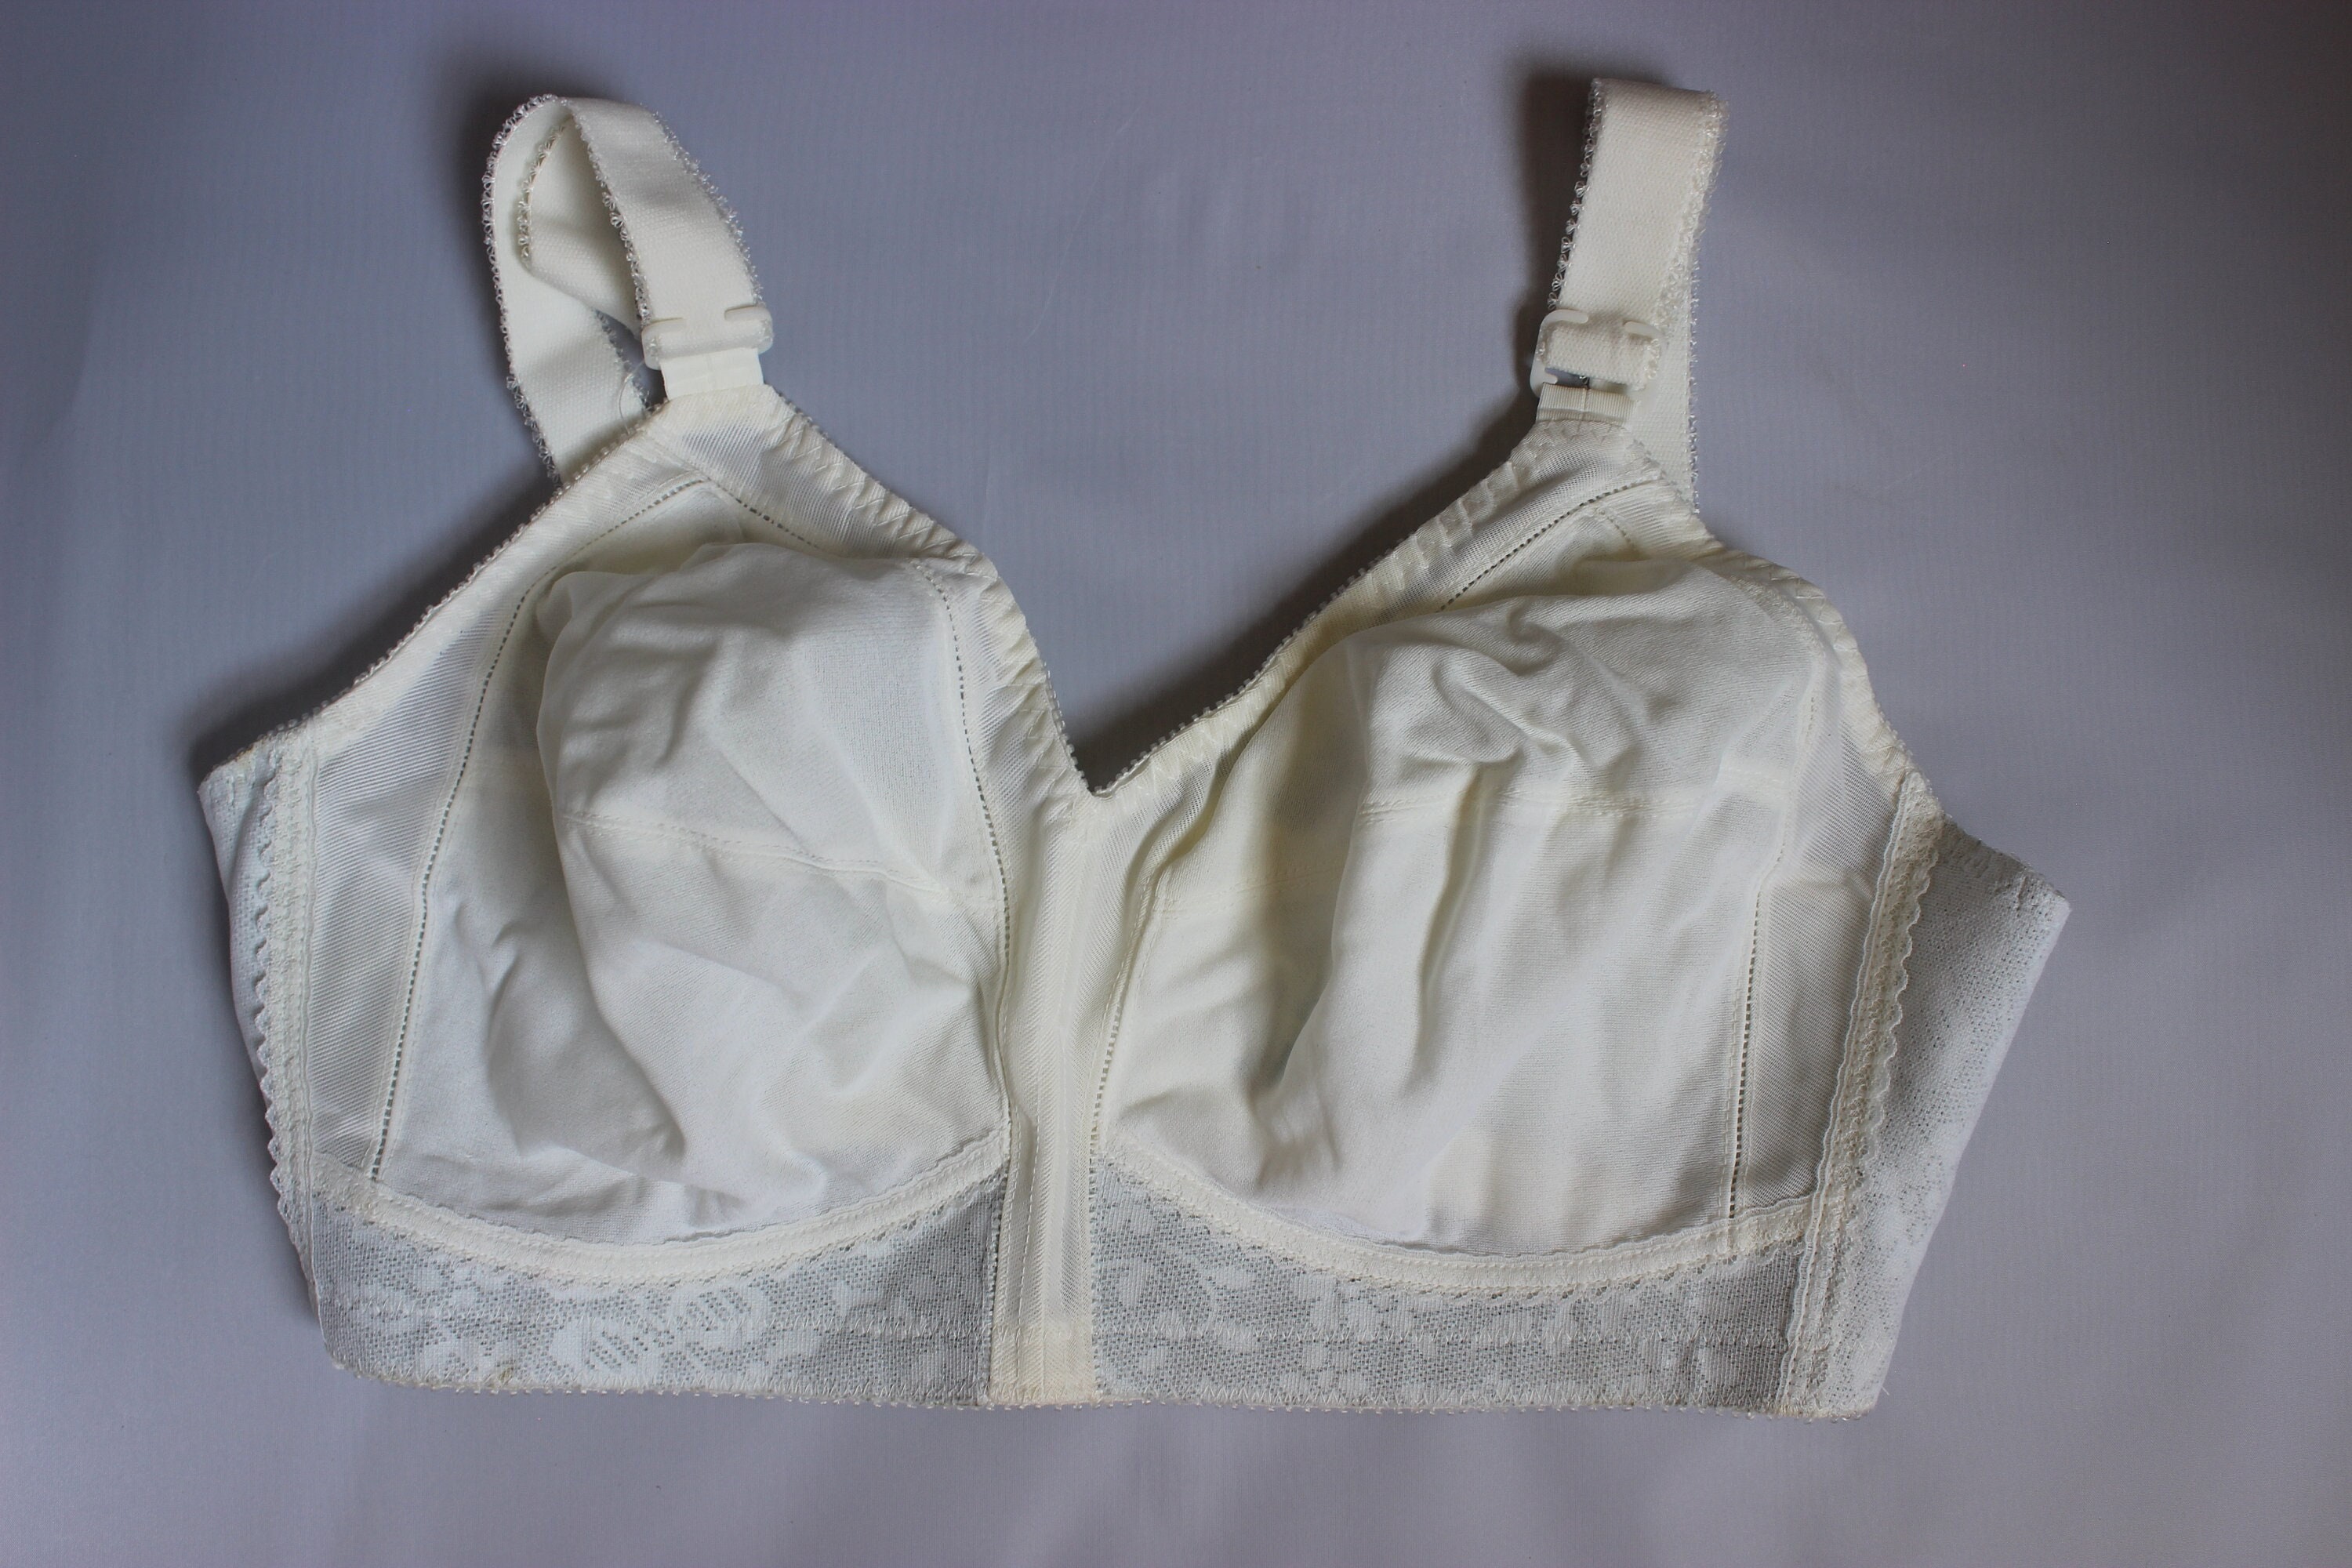 Vintage New Playtex 18 Hour Front Close Soft Cup Bra with Flex